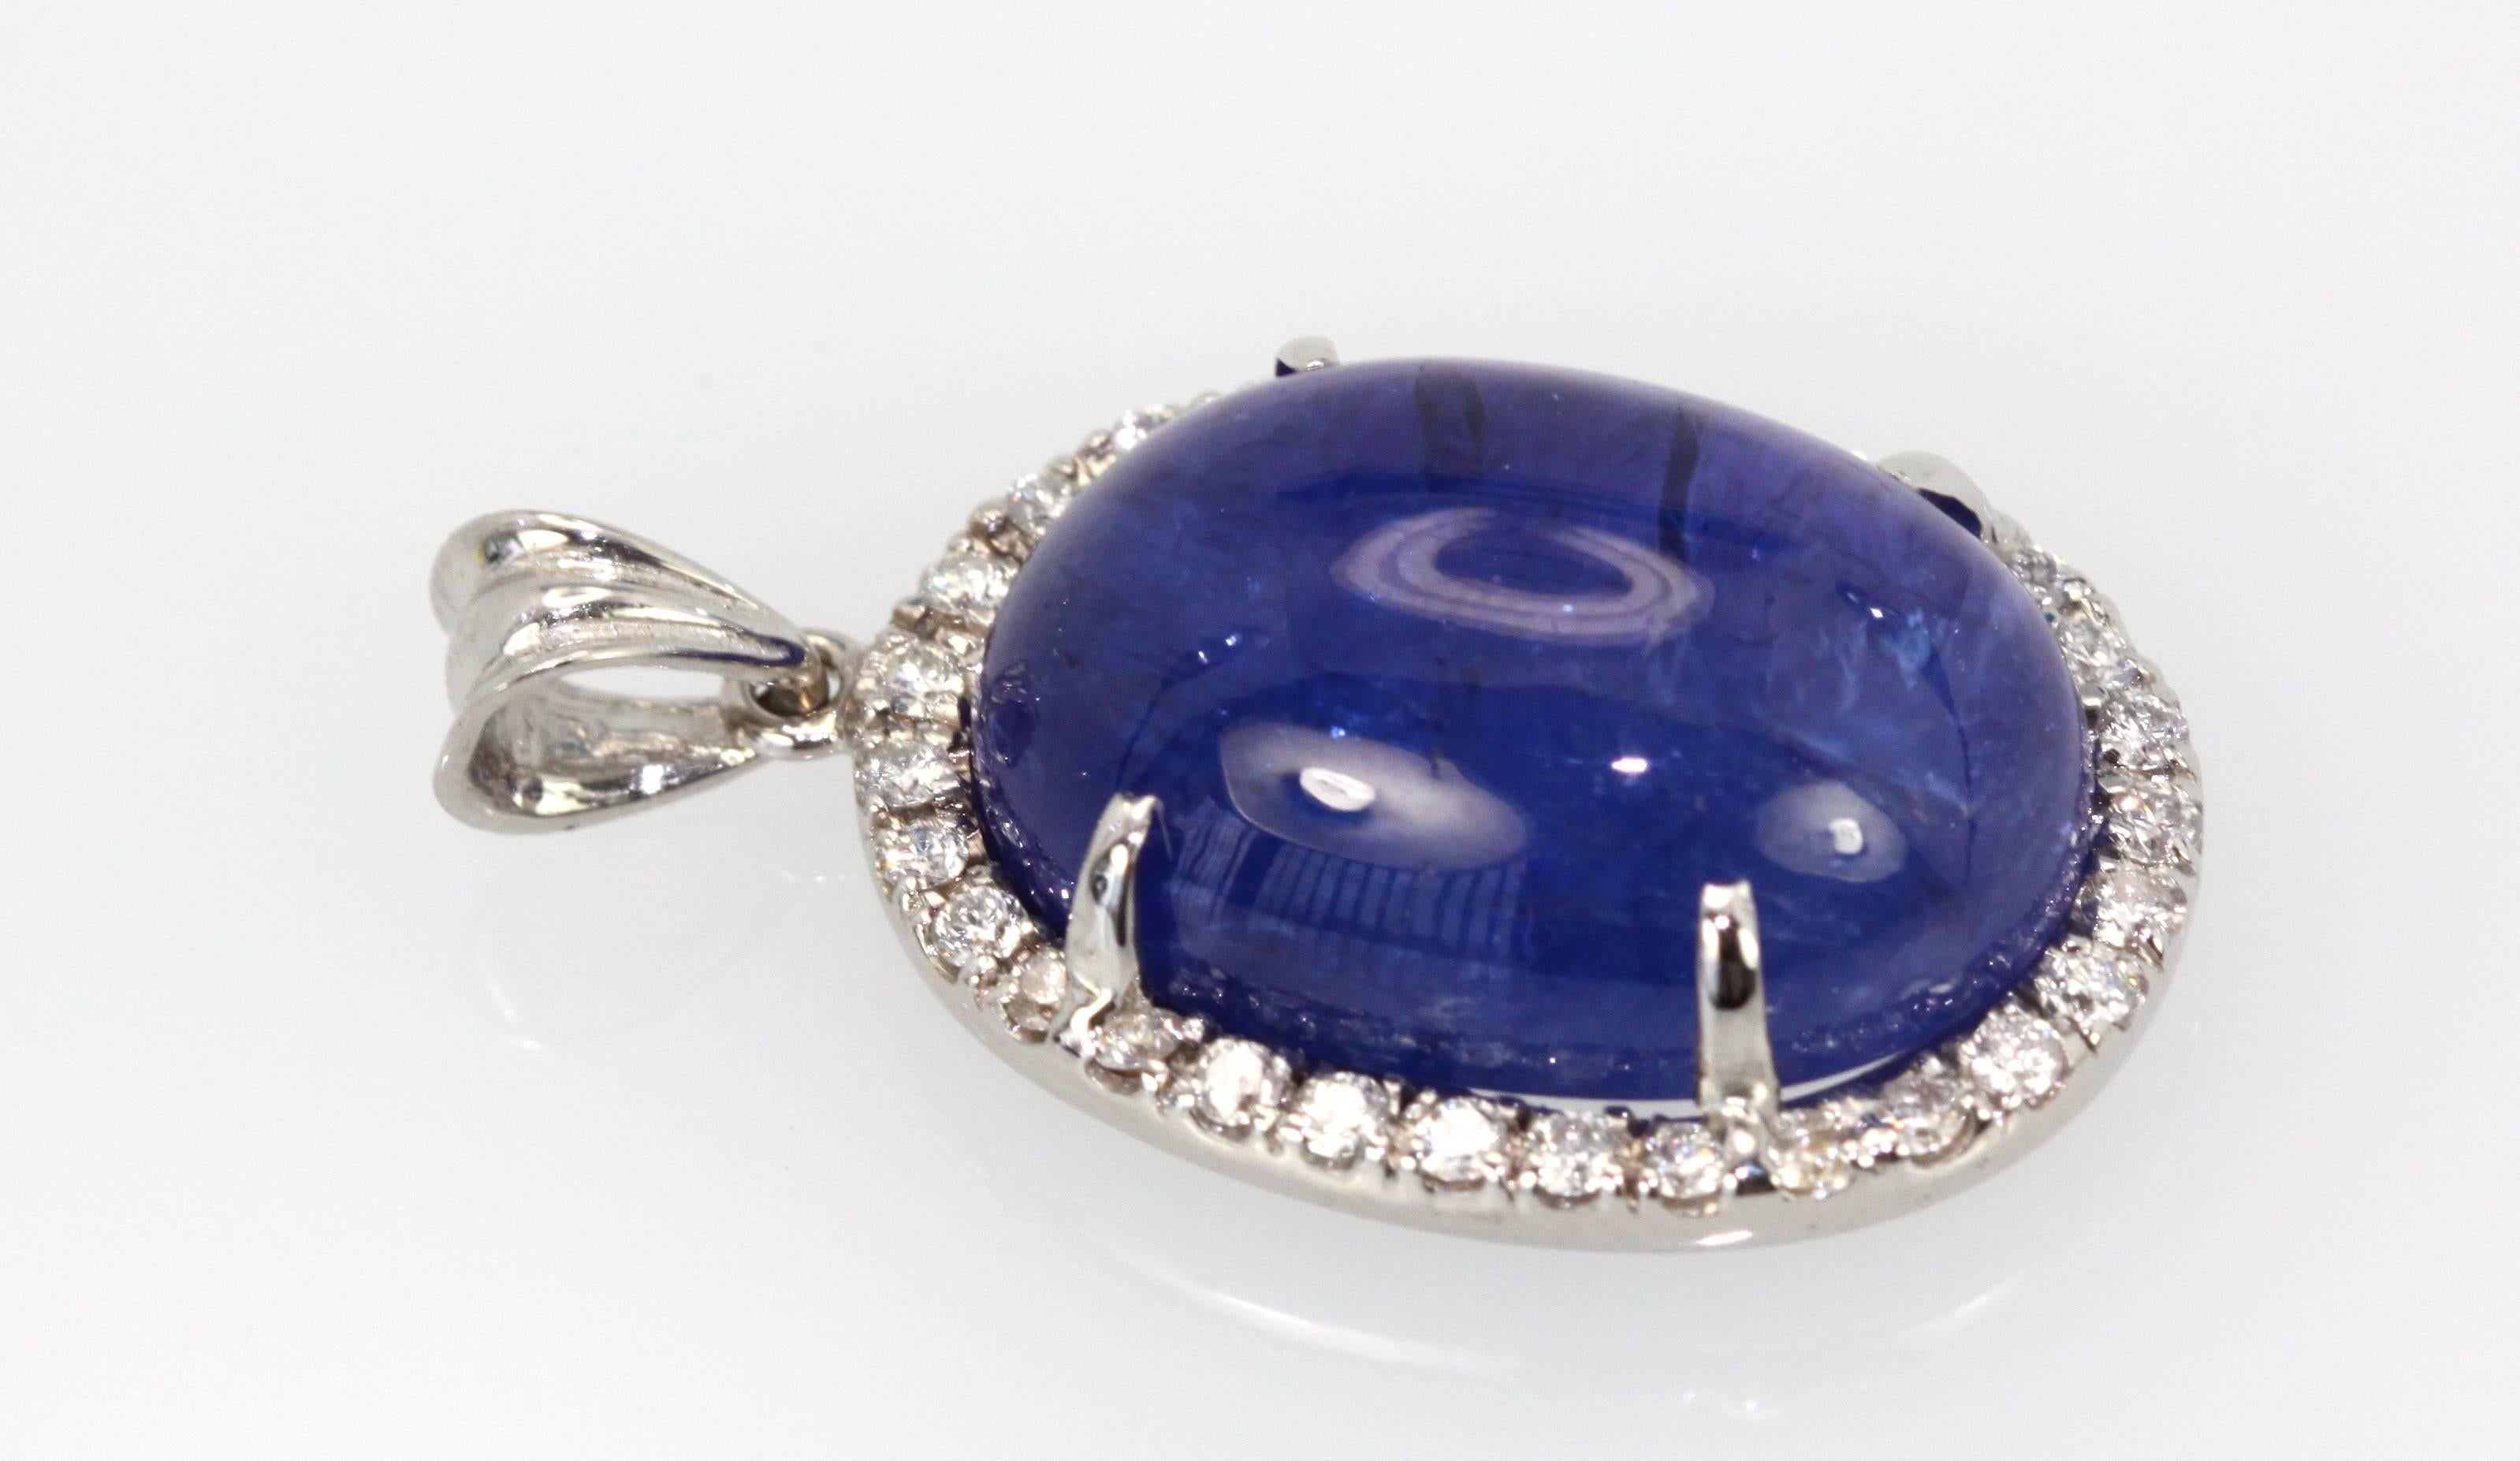 This Tanzanite Cabochon Pendant with a Diamond surround is done in 18K White Gold and is brand new and never been worn.  This tanzanite is a gorgeous shade of blue with nice metrics and it is large 21 Carats with a Diamond Border of .50 Carats of